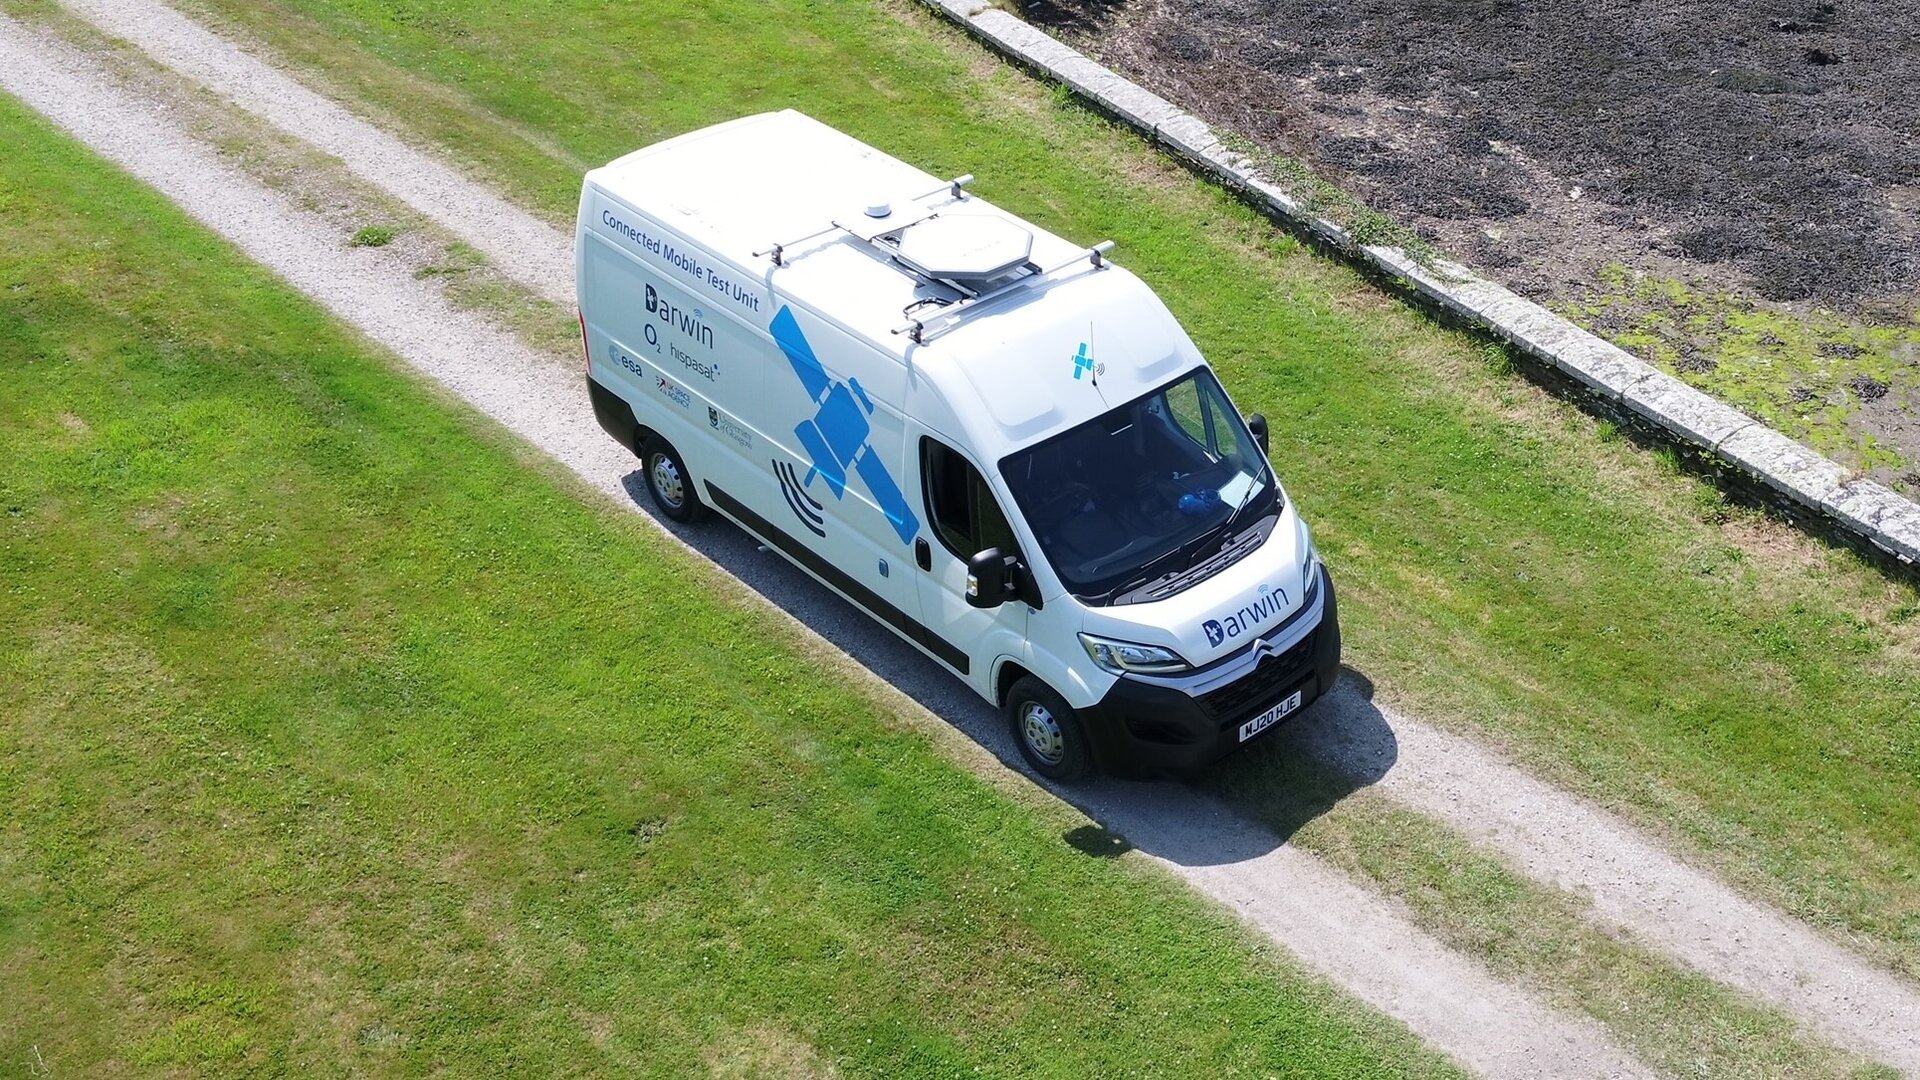 The Darwin connected delivery van